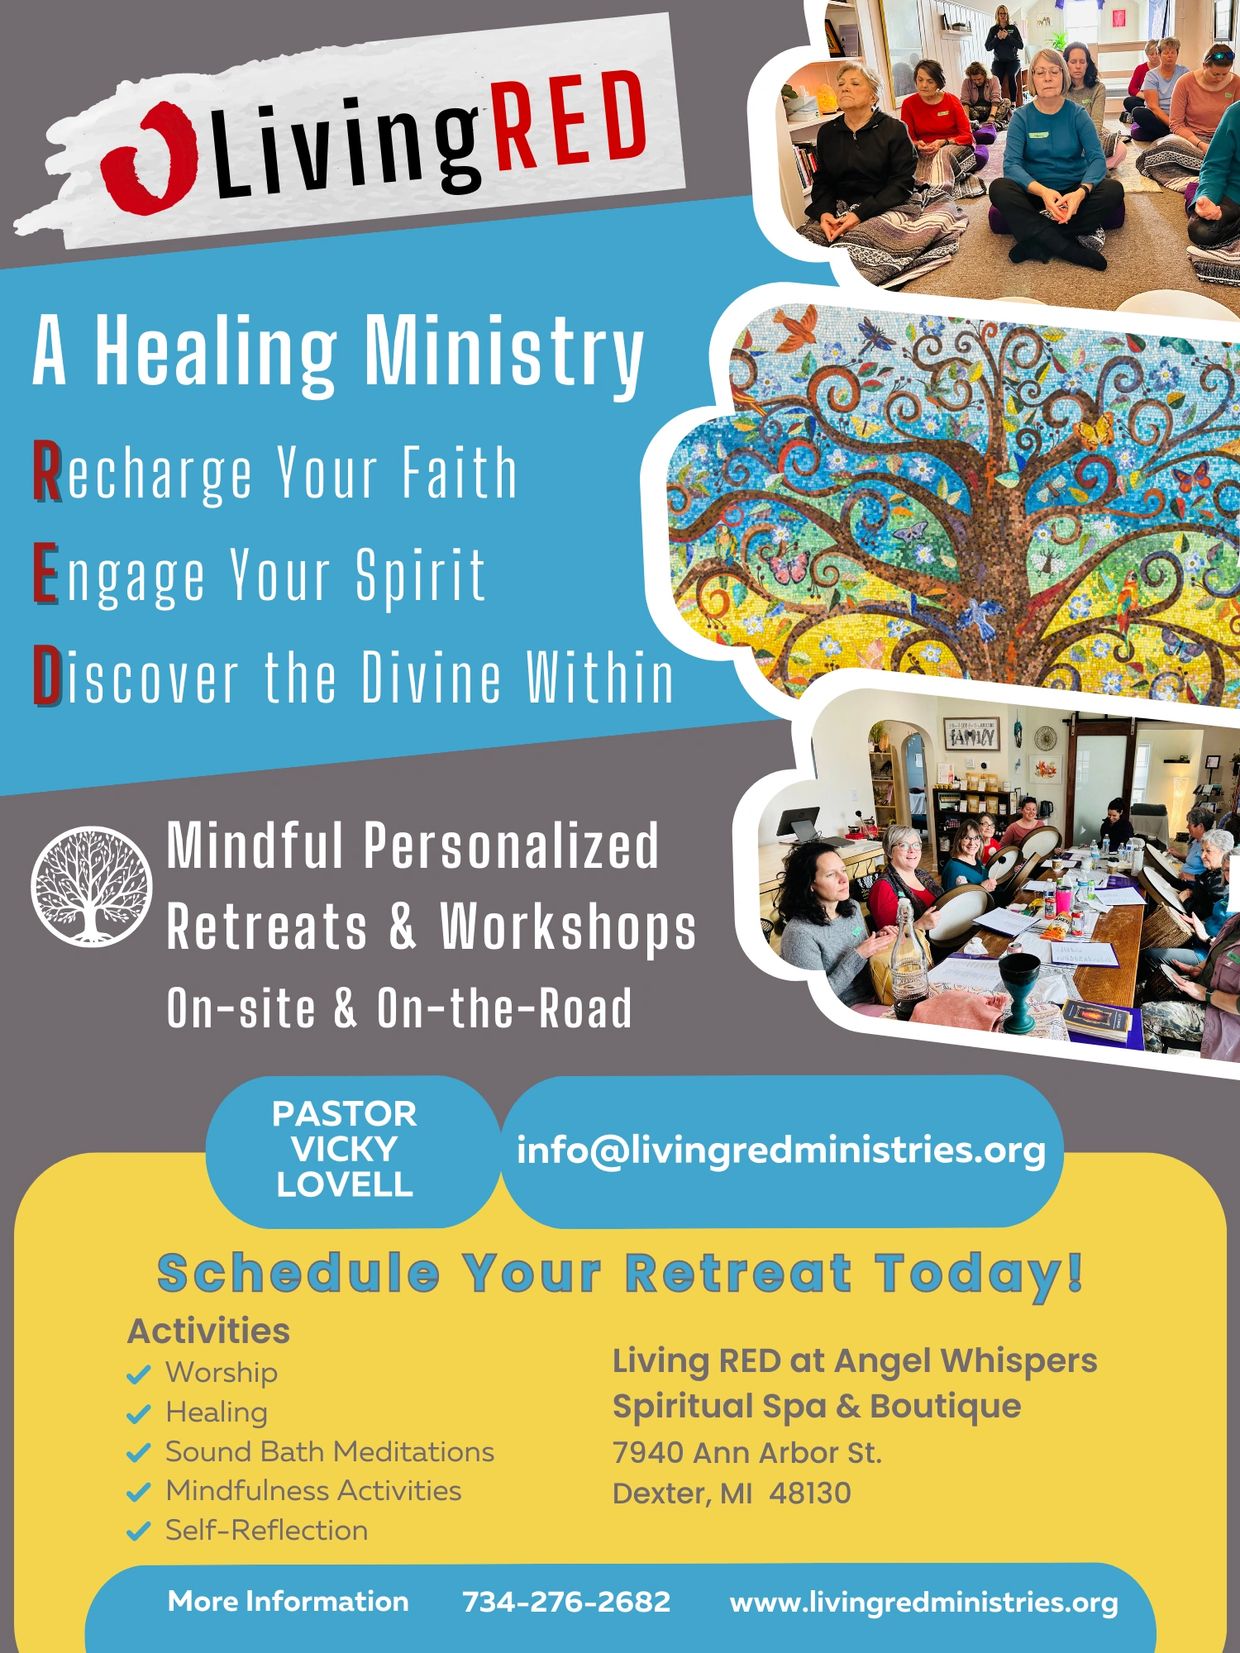 Mindful personalized retreats and workshops 
Living RED Worship 
Pastor Vicky Lovell 
Danielle Groth